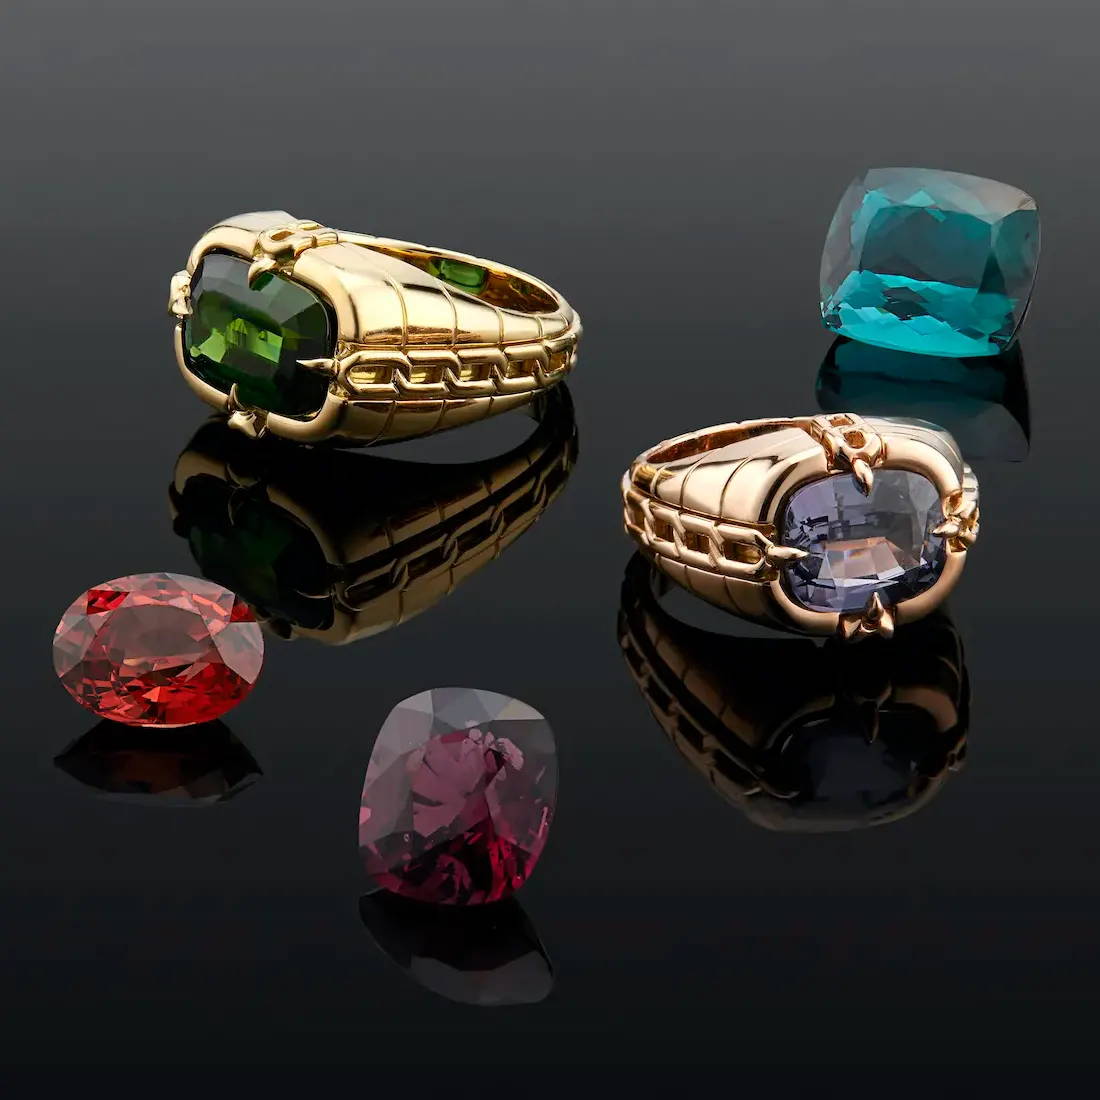 tourmaline and spinel gypsy rings and gemstones